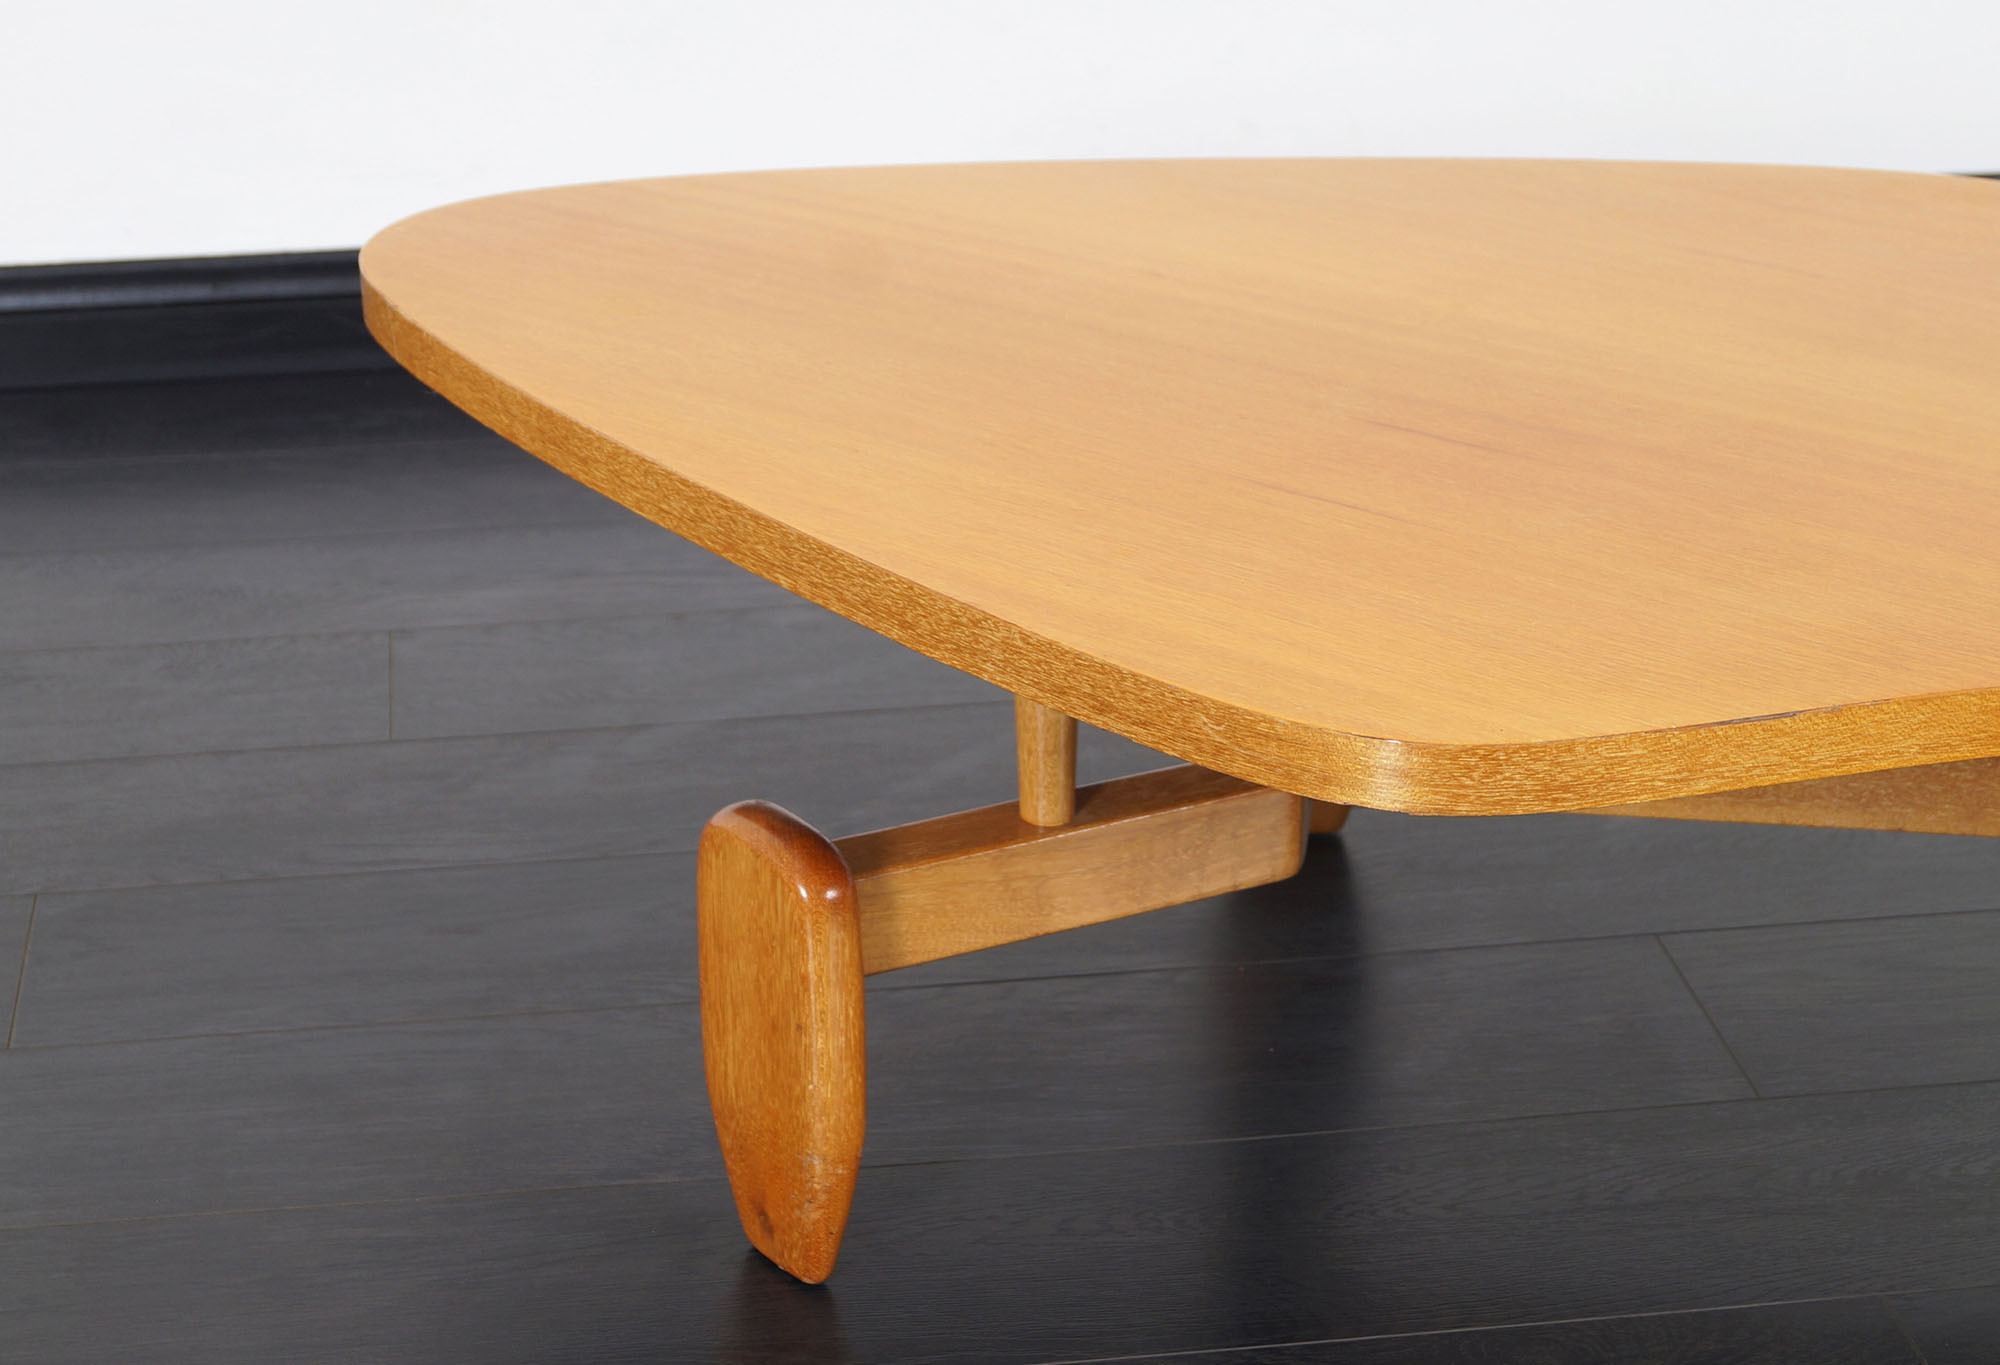 Vintage Outrigger Floating Top Coffee Table by John Keal